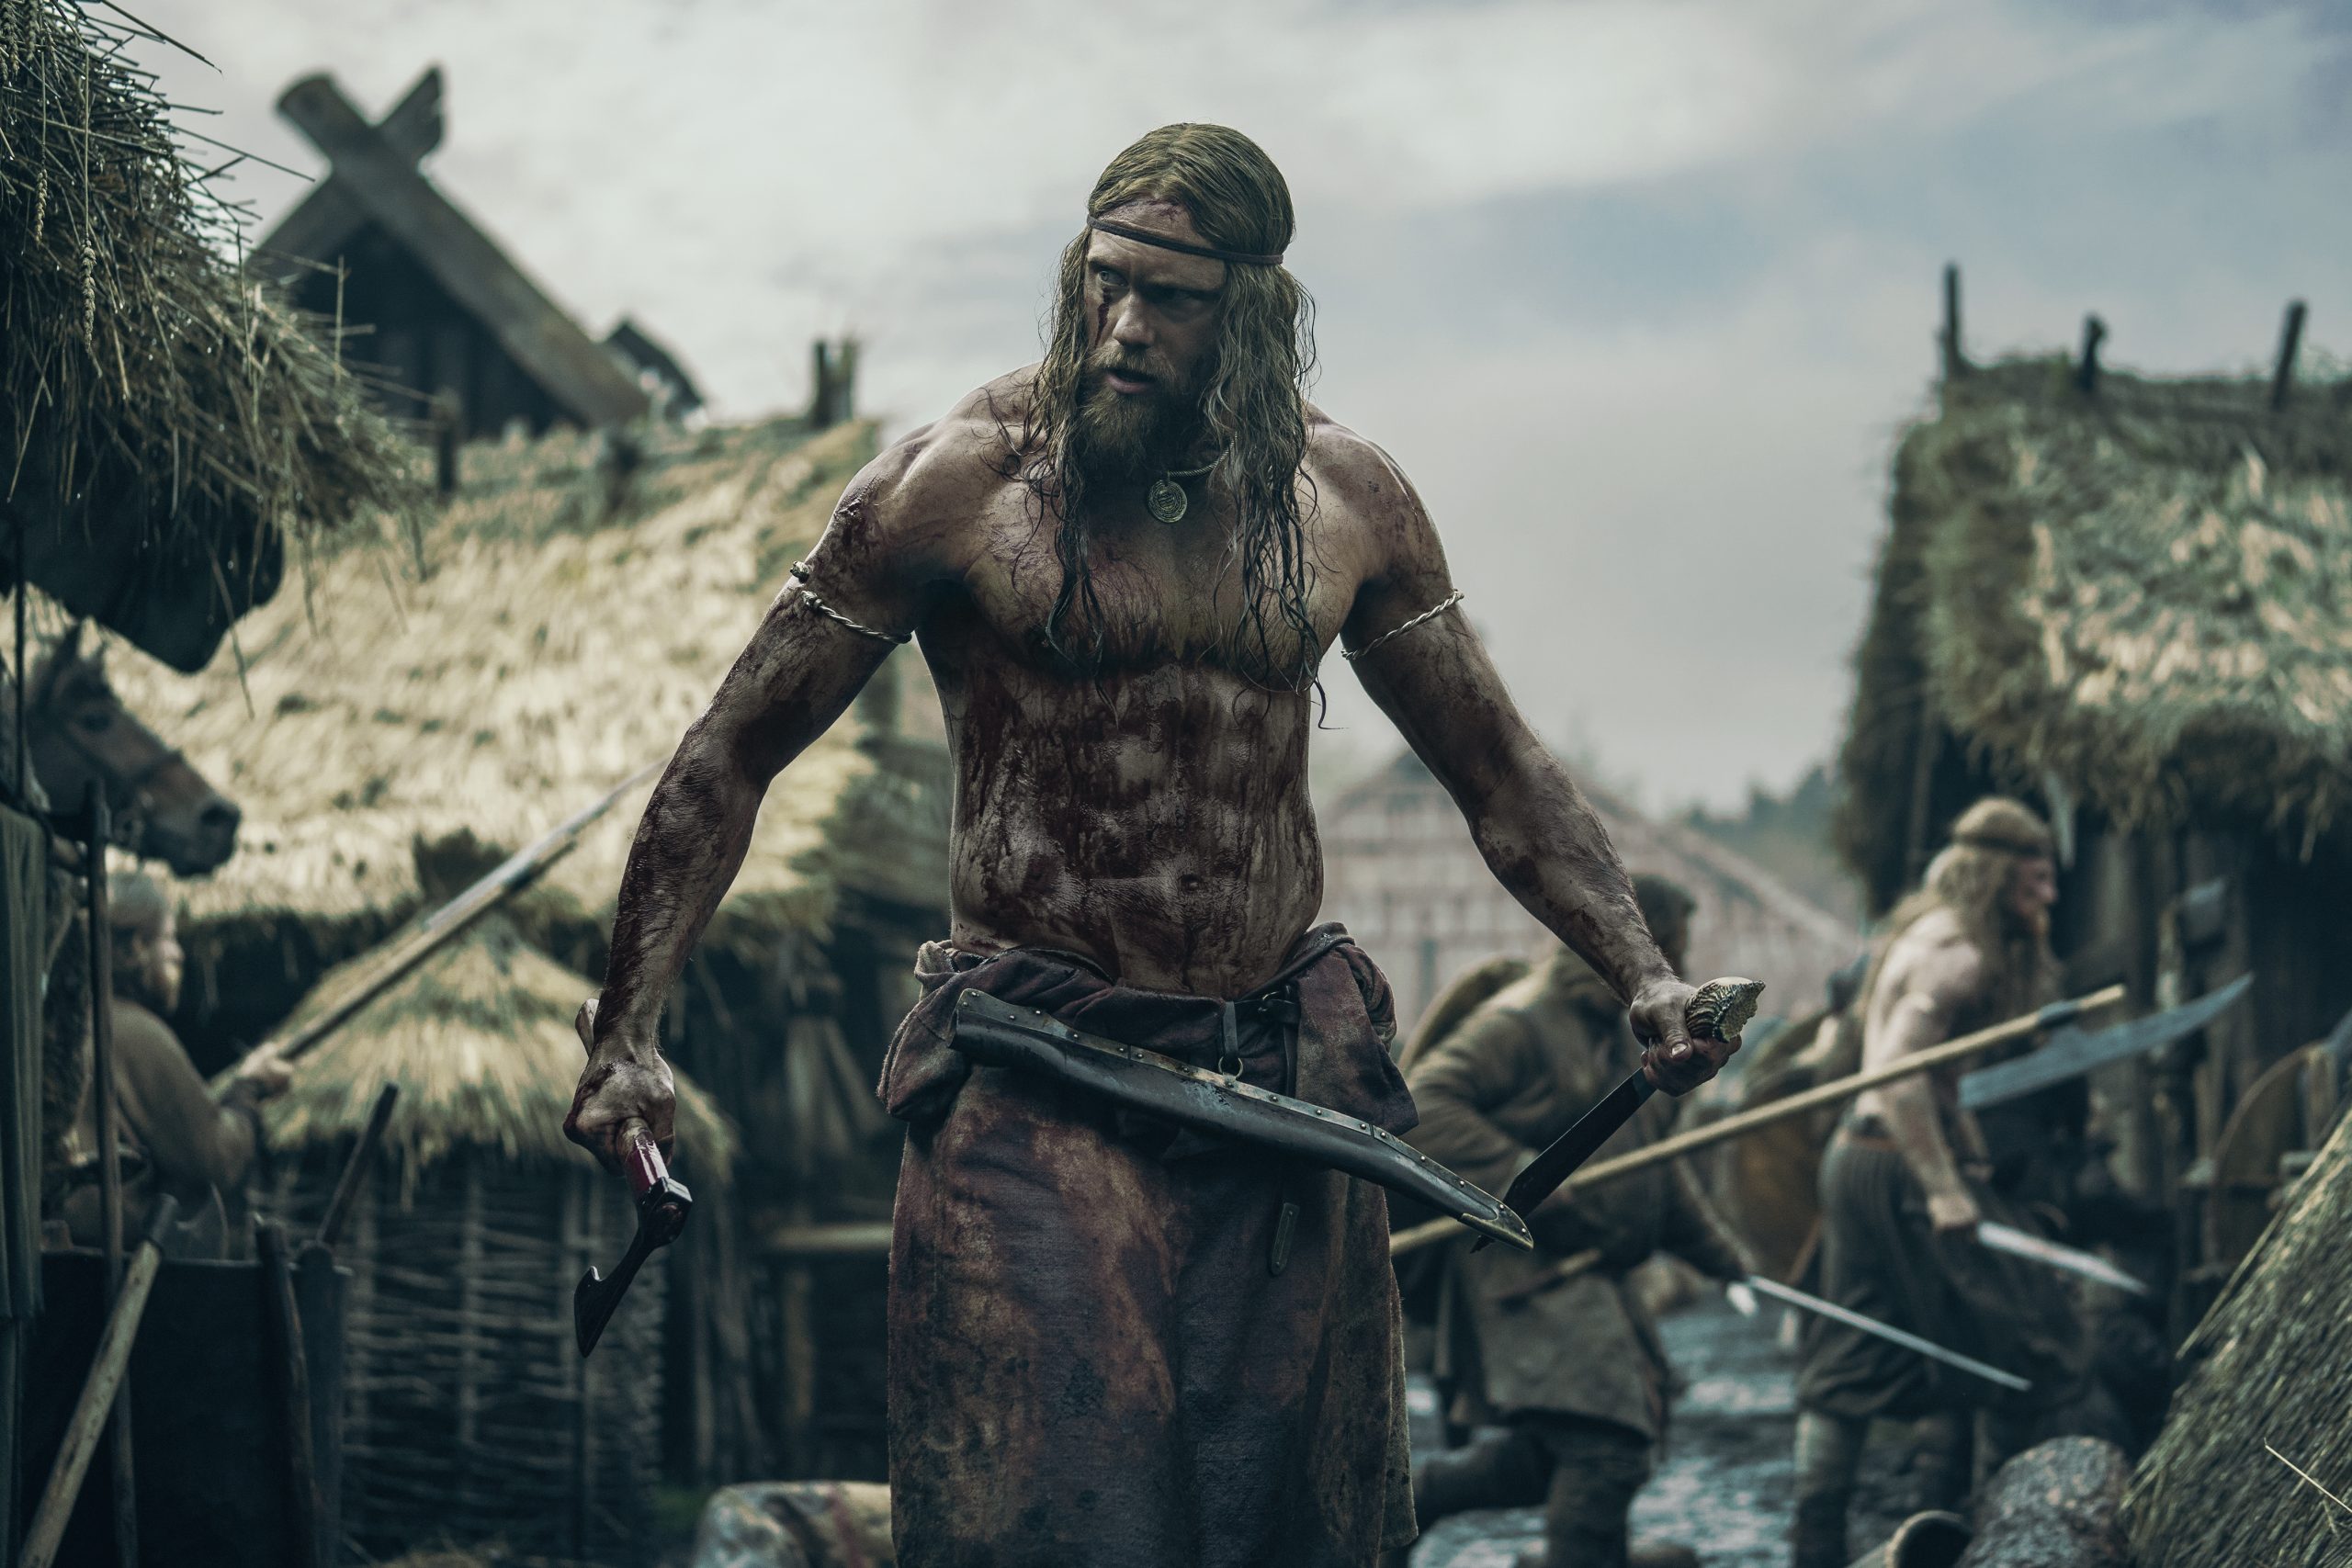 4179_D029_00035_RC3
Alexander Skarsgård stars as Amleth in director Robert Eggers’ Viking epic THE NORTHMAN, a Focus Features release.  
Credit: Aiden Monaghan / © 2021 Focus Features, LLC